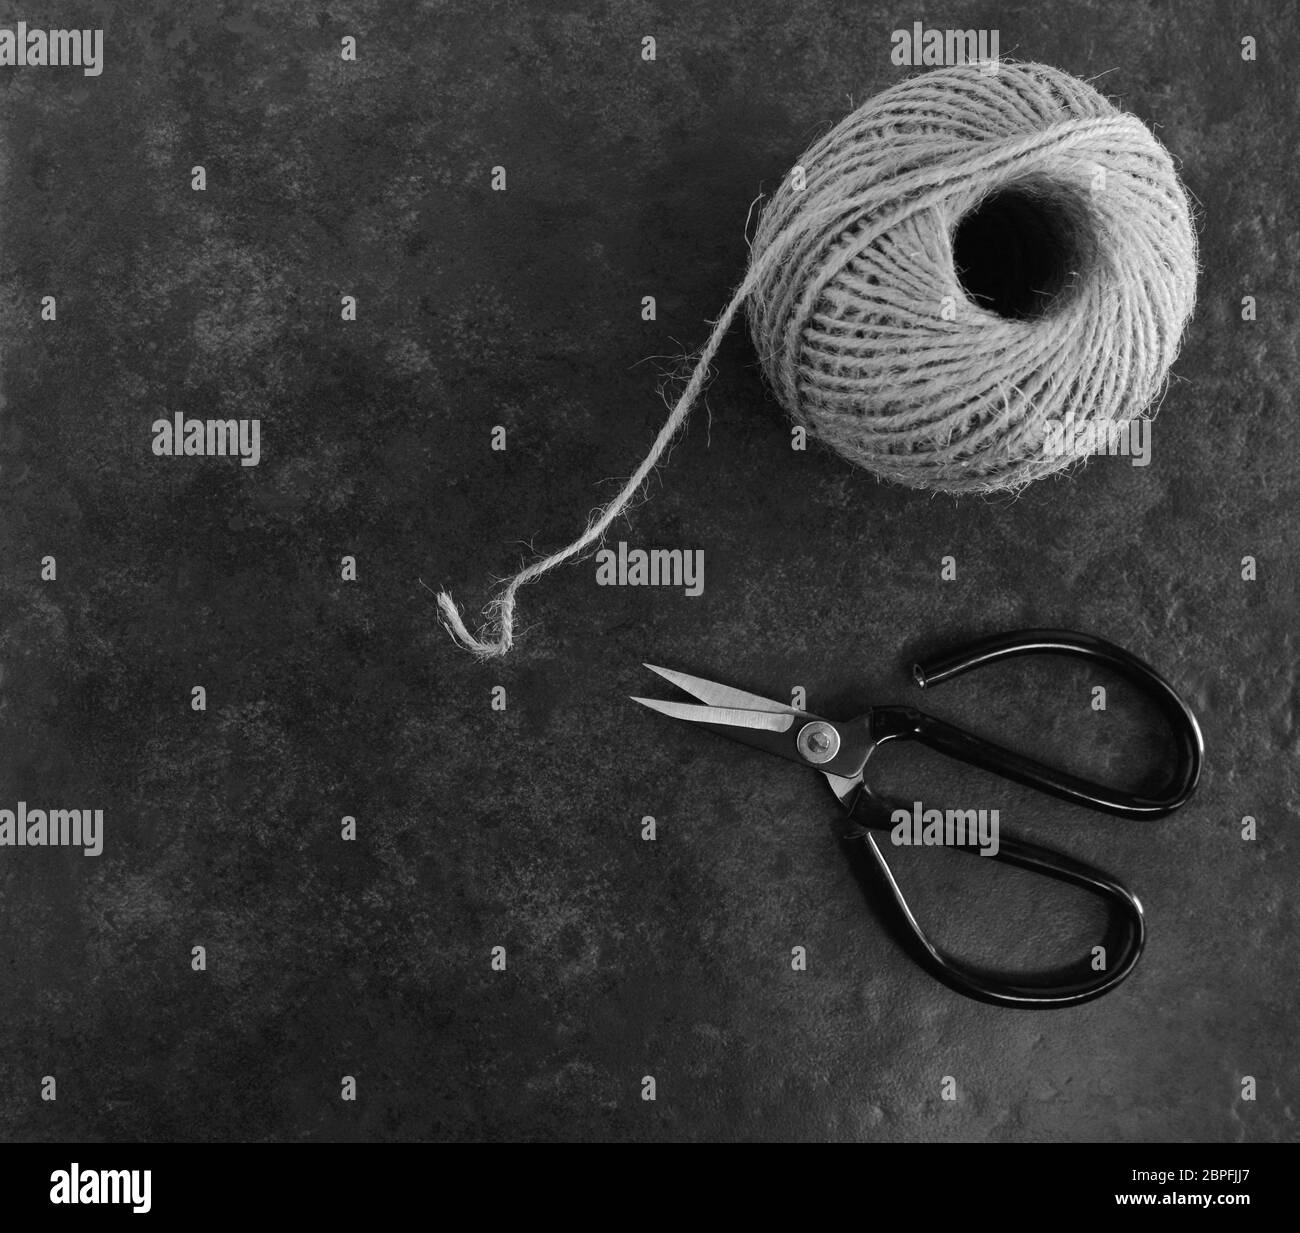 Ball of Brown String and Scissors on White Background Stock Photo - Alamy